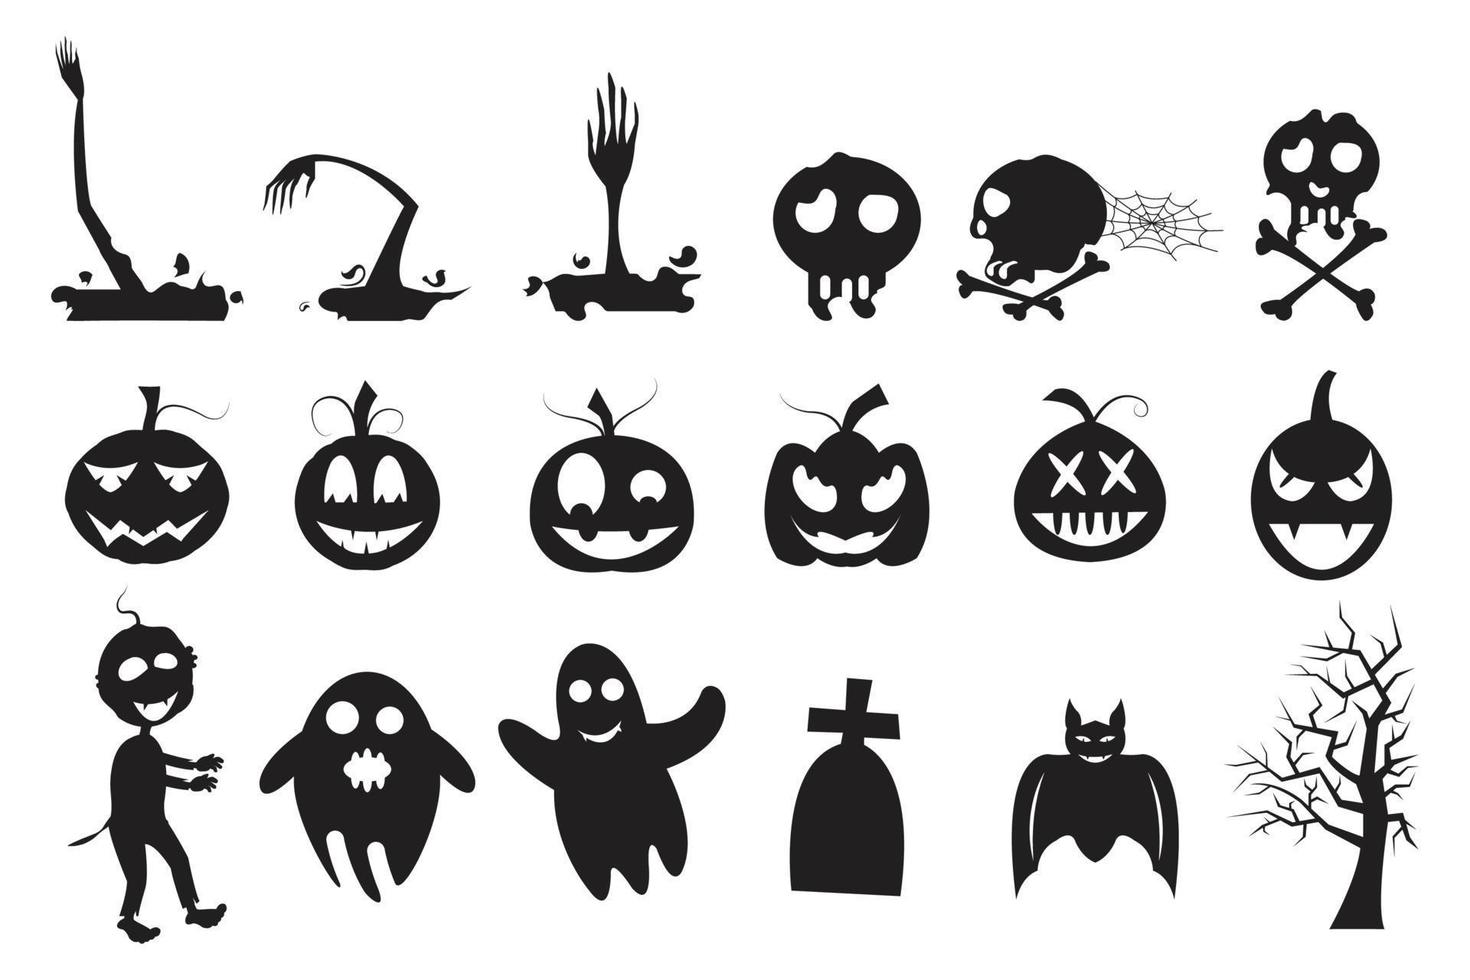 Halloween celebration with pumpkin silhouette, ghost hand, boo, zombie, bat, grave and dry tree vector